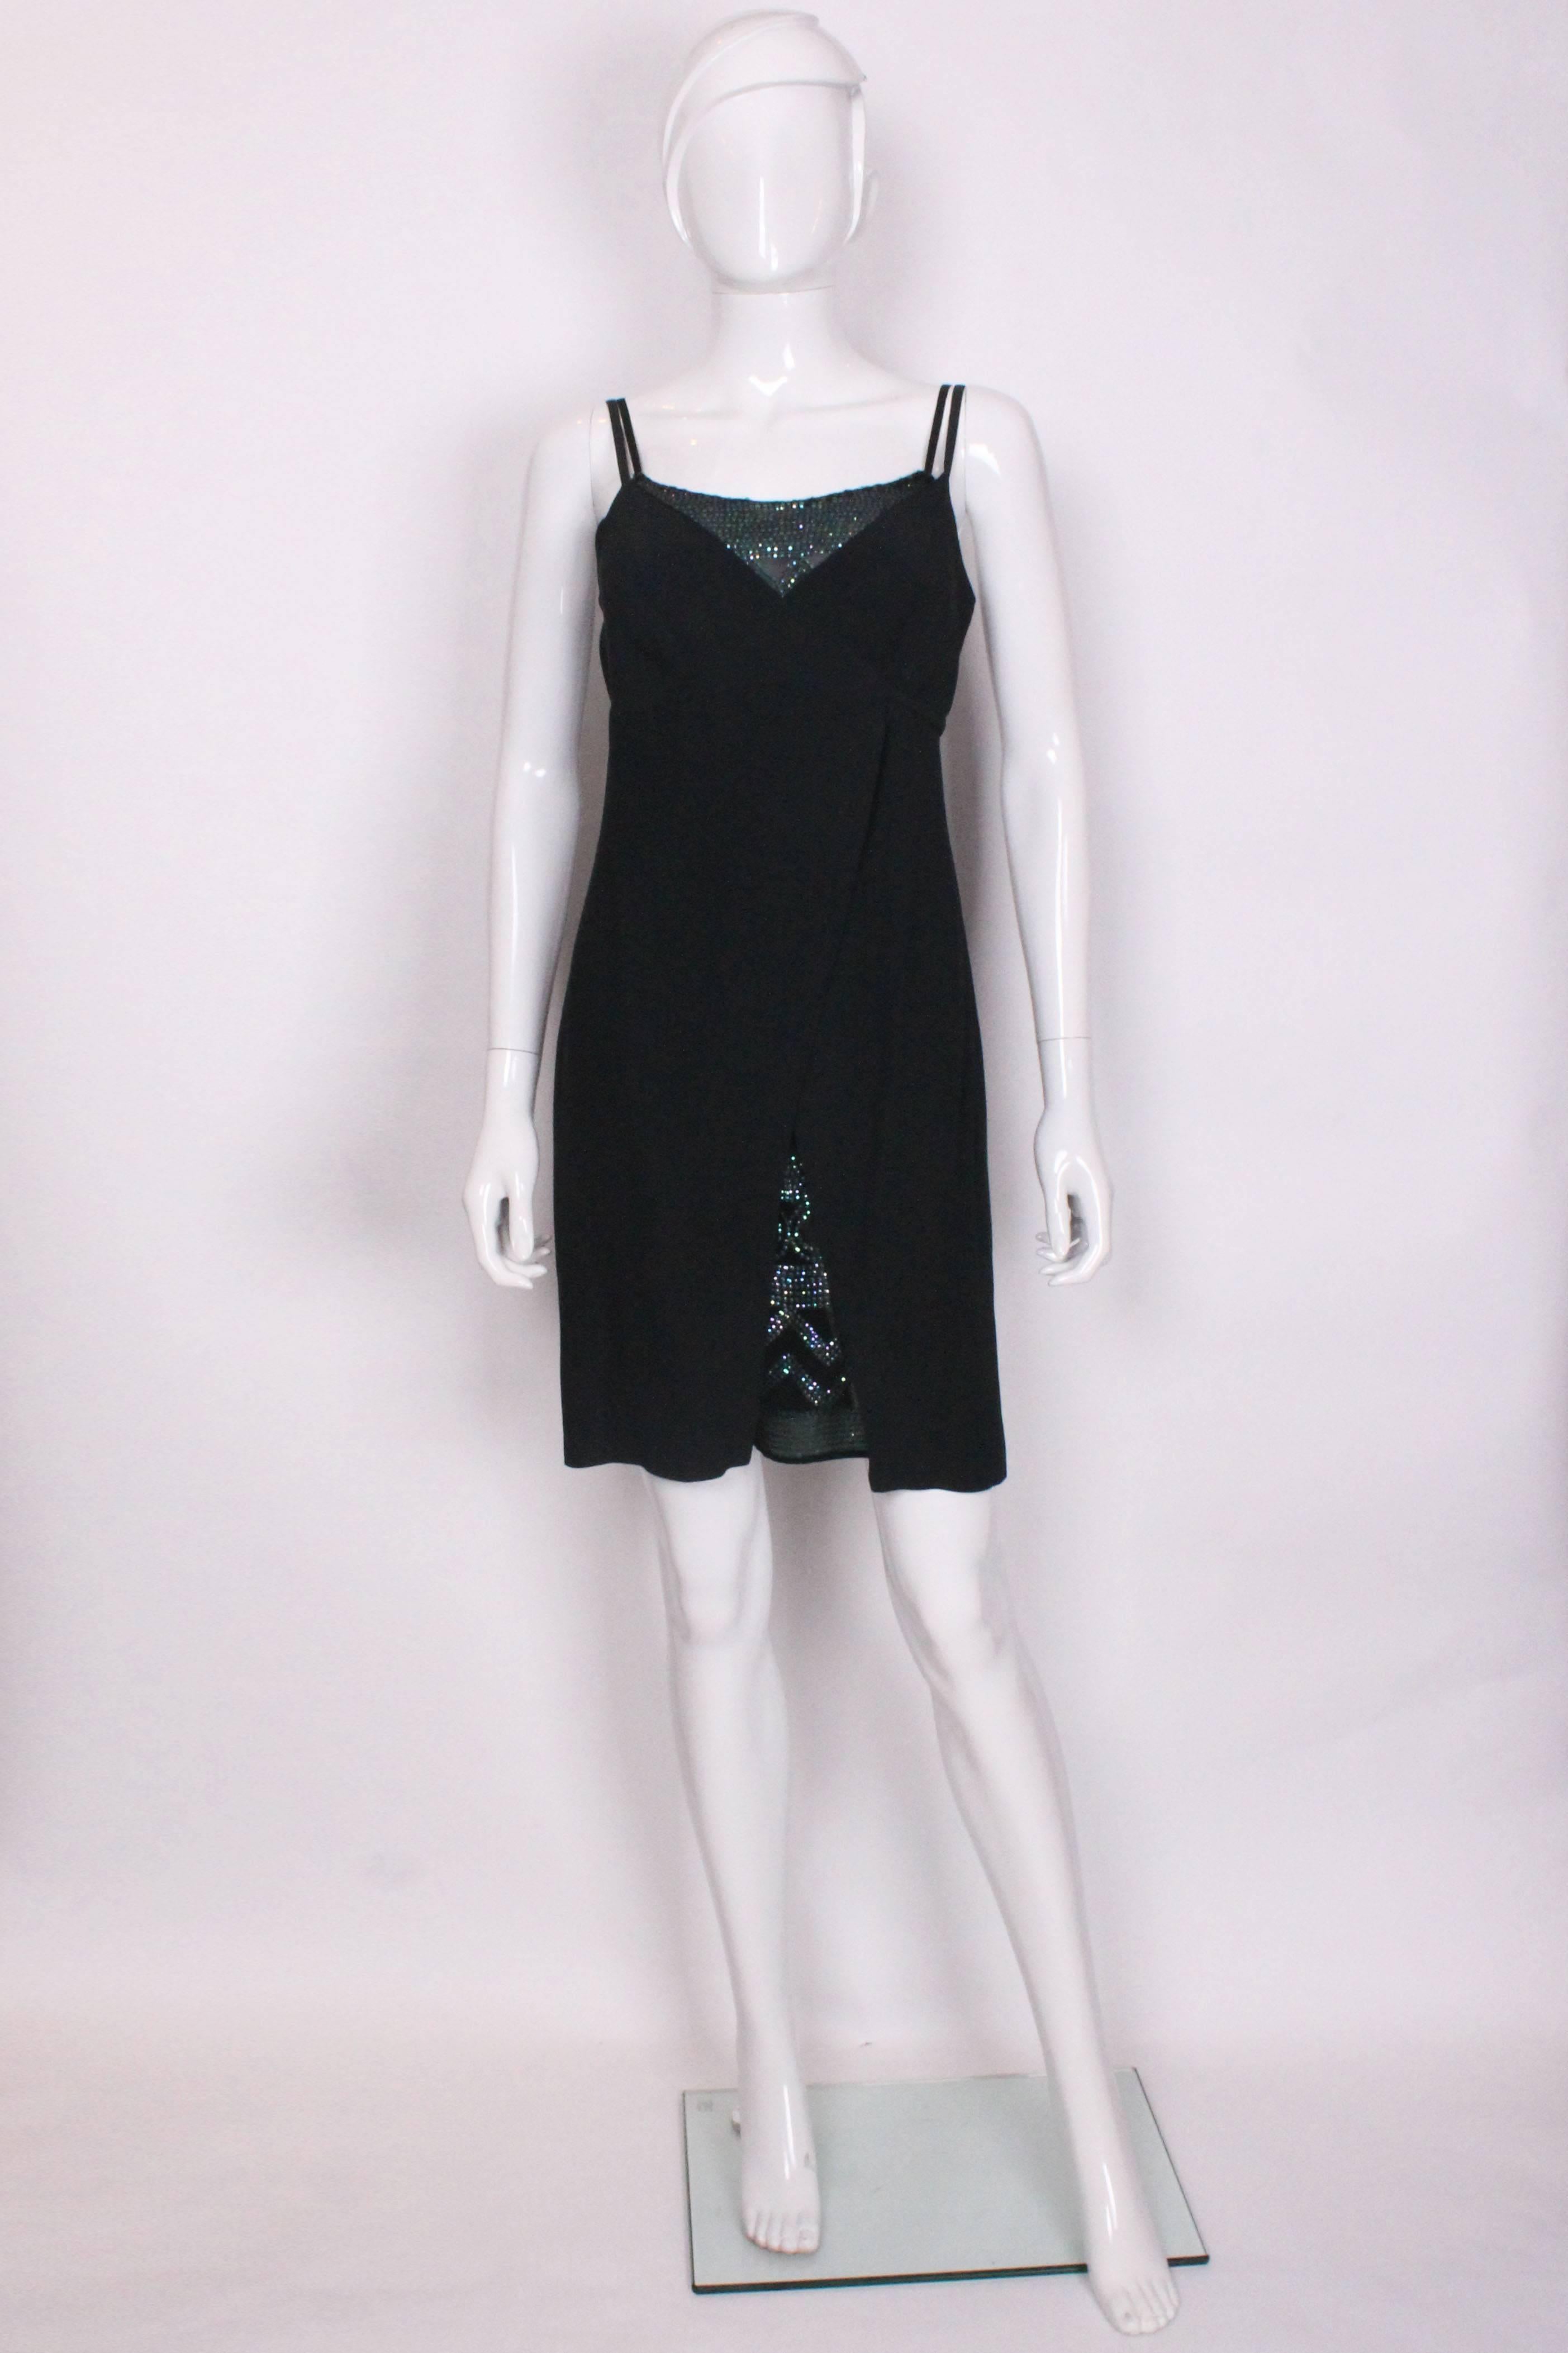 A chic cocktail dress by La Perla. The inner dress is embellished with sequins in purple, green and blue in a geometric print .The outer dress is dark green , which wraps around and ties under the bust. There is an invisible side zip.